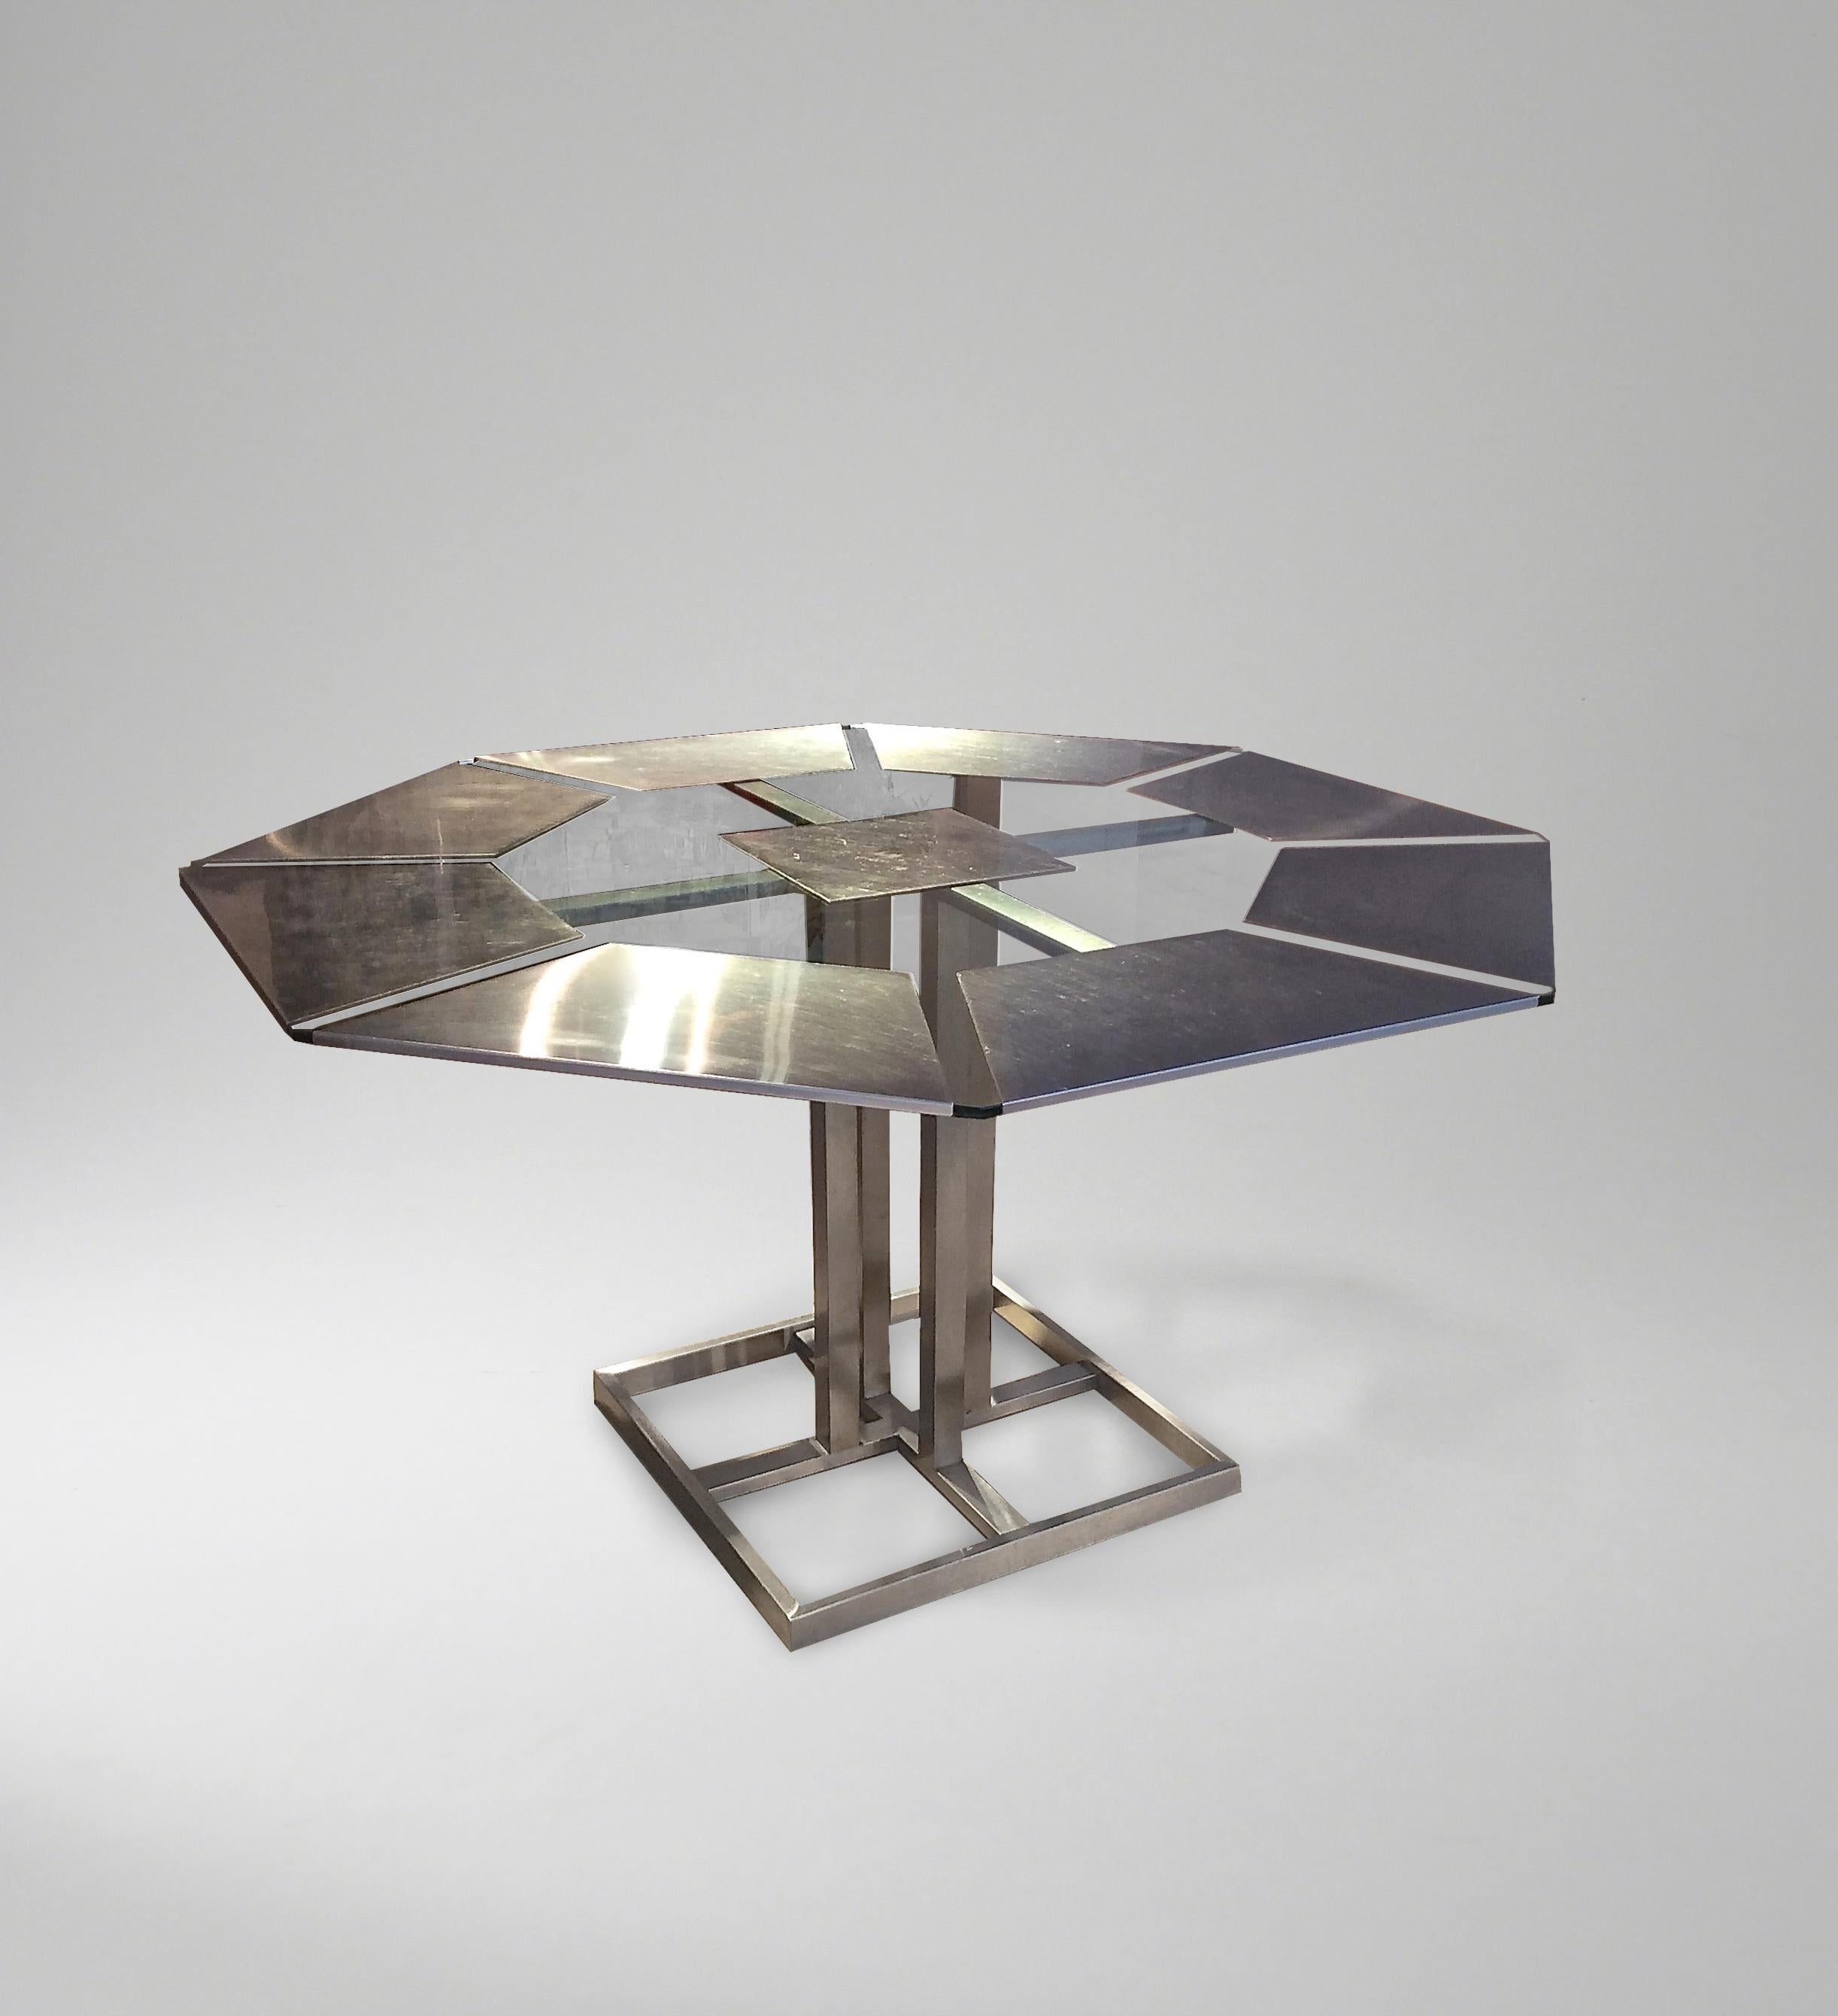 Late 20th Century Octagonal Steel and Glass Dining Table by Nadine Charteret, c. 1970